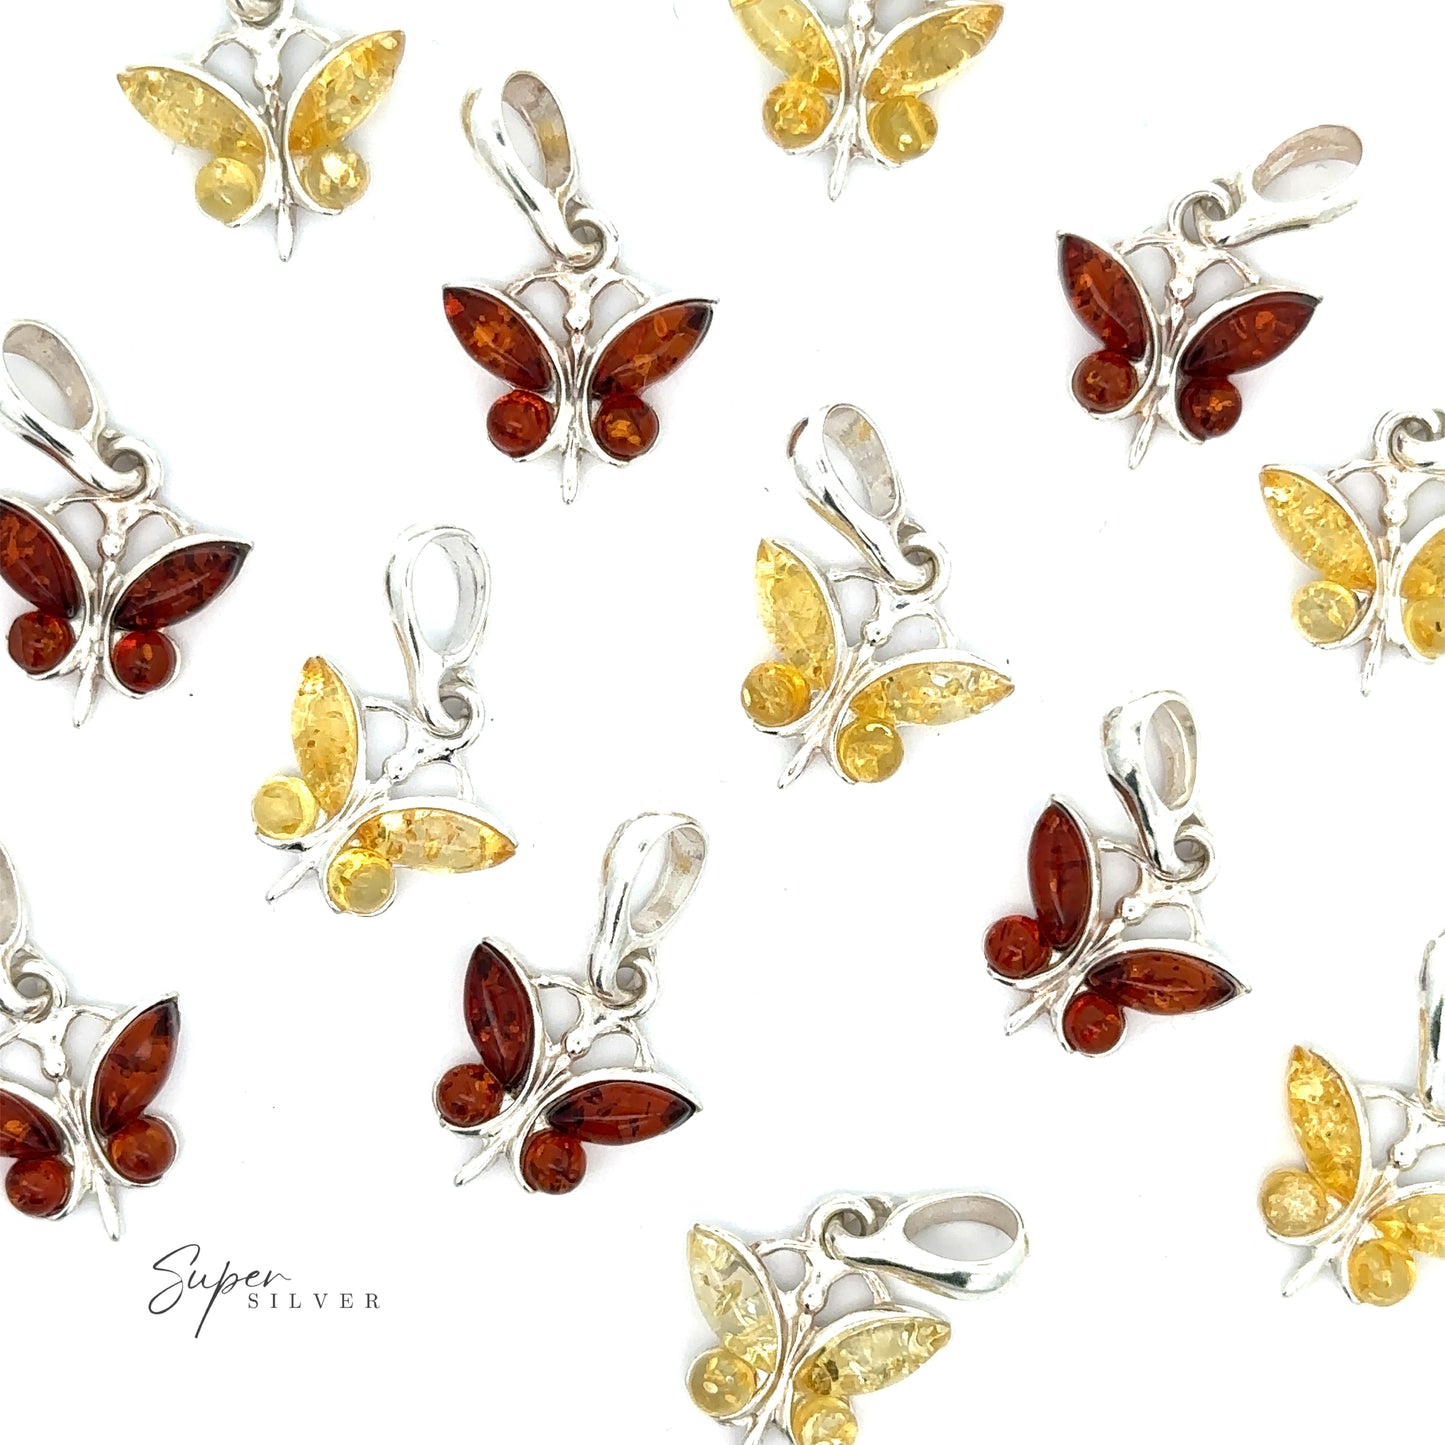 A collection of nature-inspired Small Amber Butterfly Pendants, showcasing vibrant colors of amber.